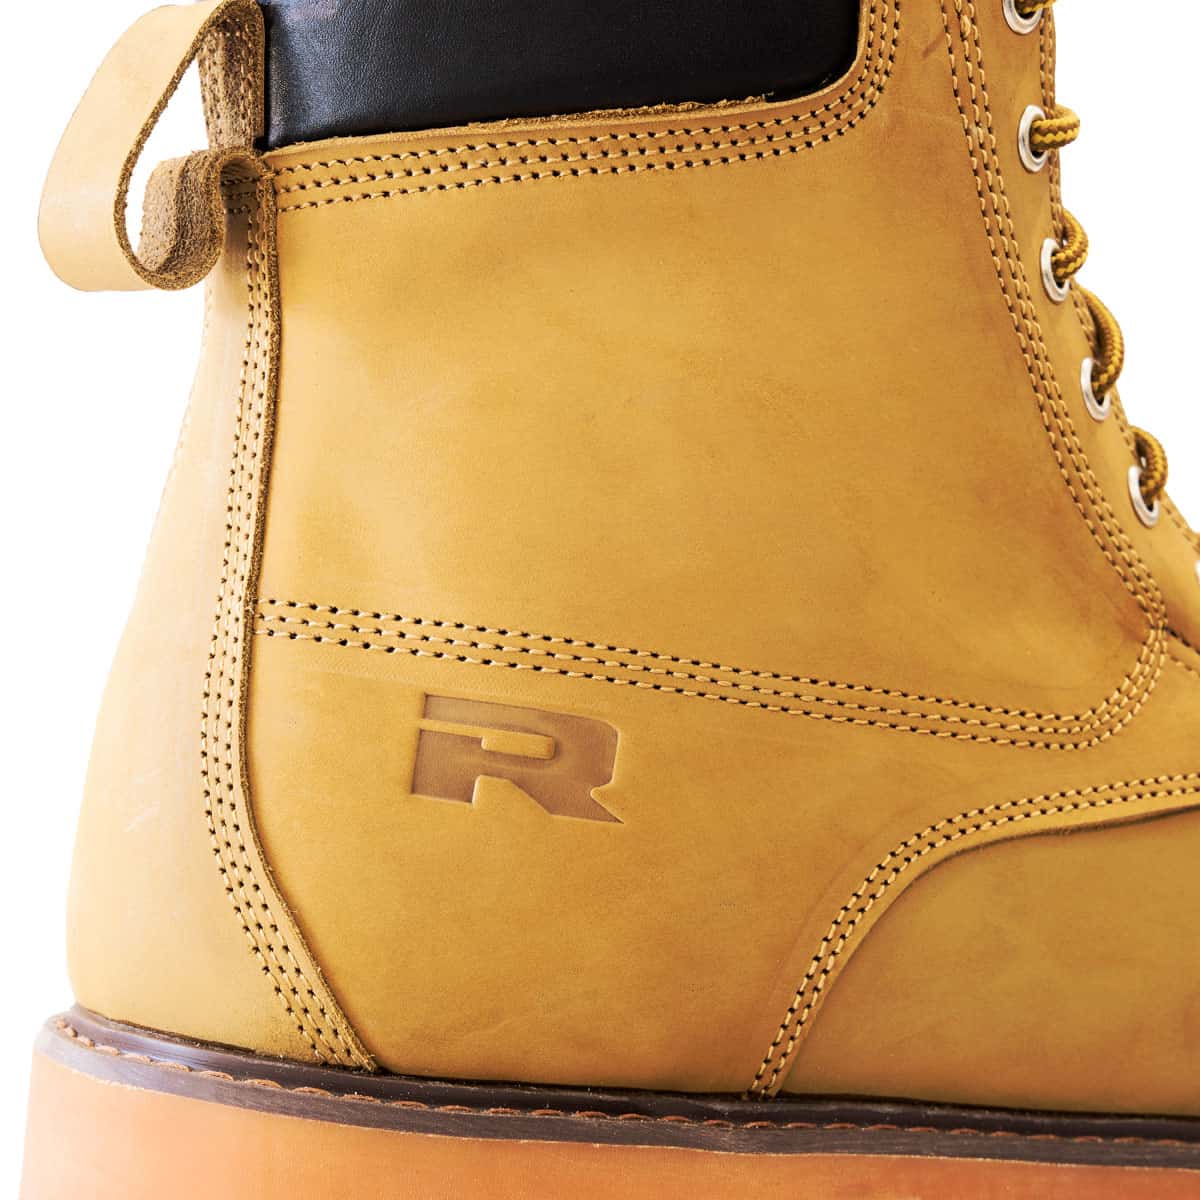 The Richa Calgary Boots are a stylish yet practical choice when it comes to your footwear. They feature a durable 100% leather construction - heel 